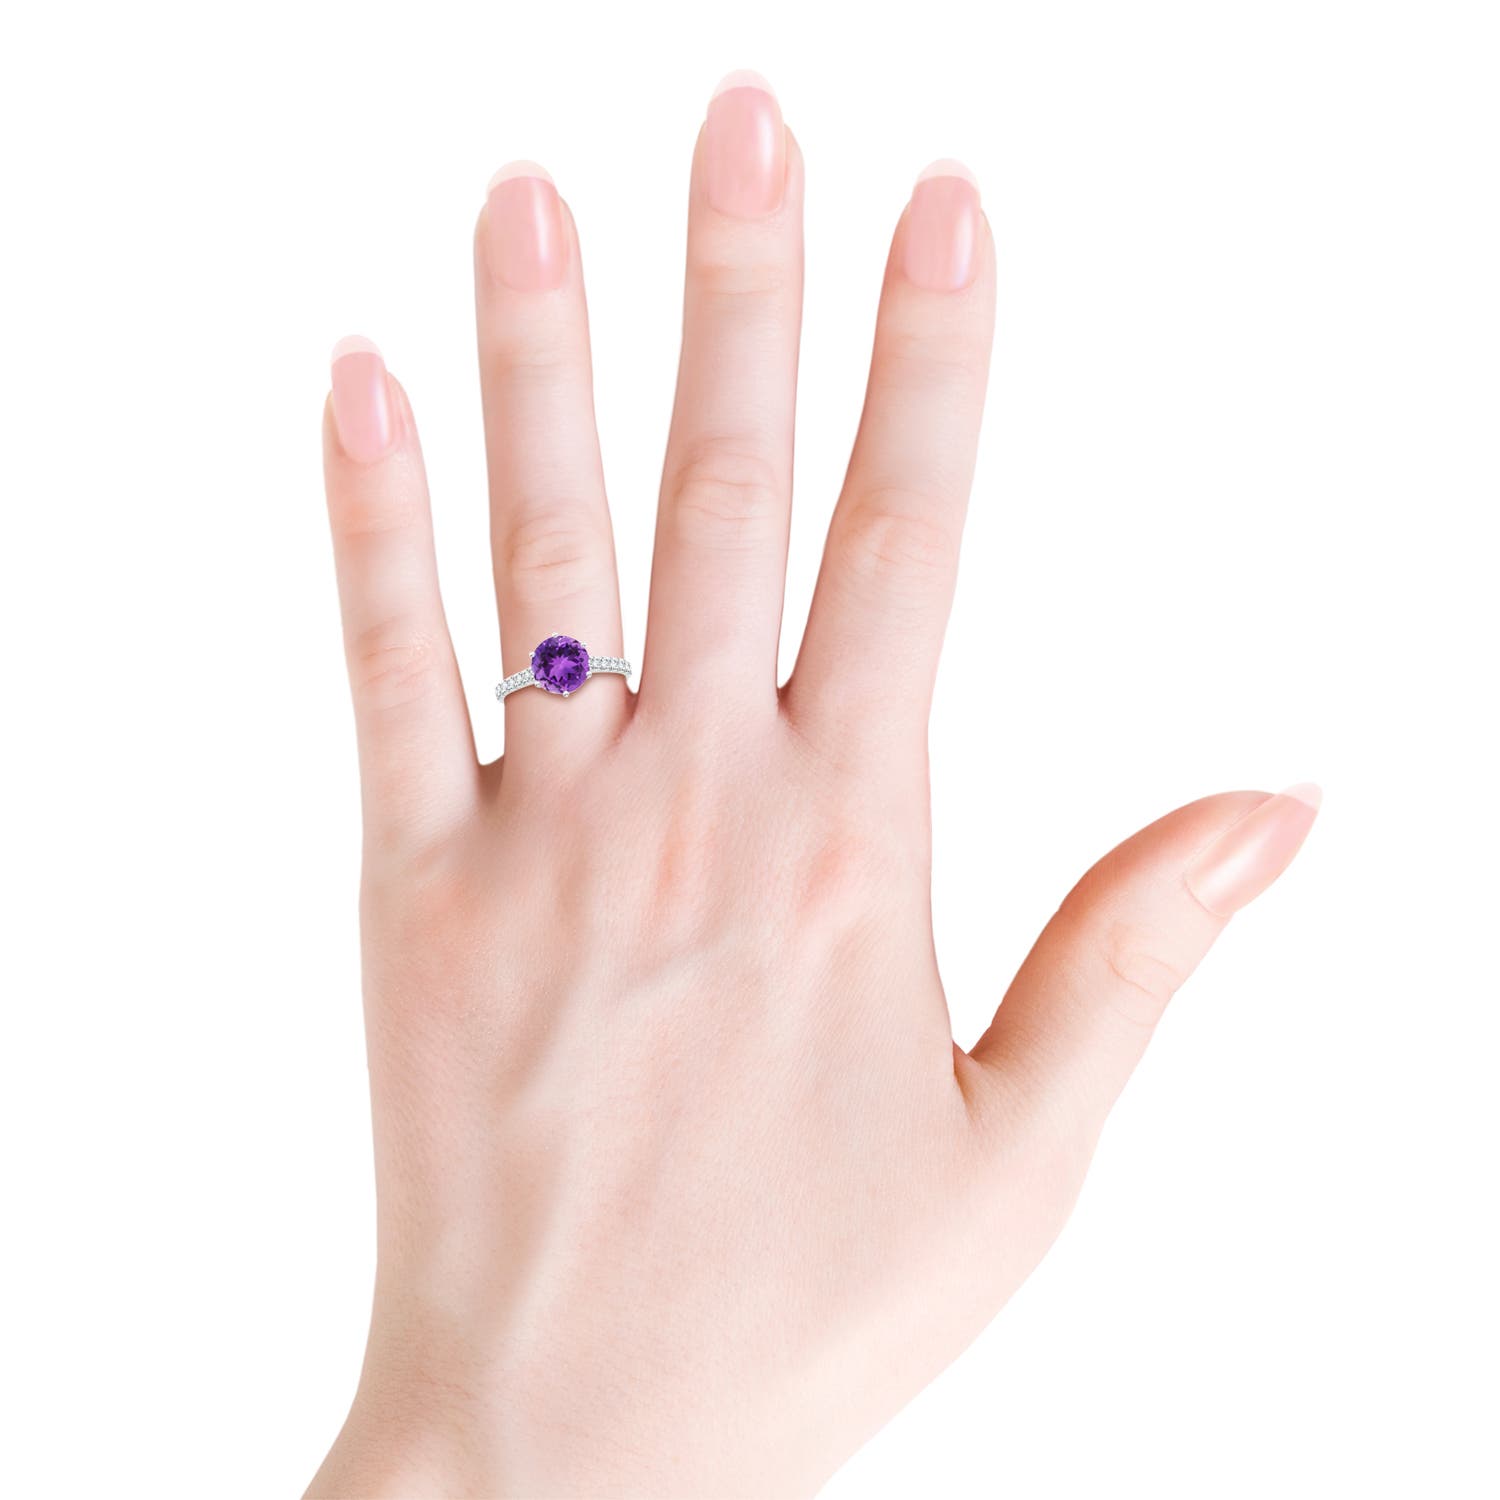 AAA - Amethyst / 2 CT / 14 KT White Gold